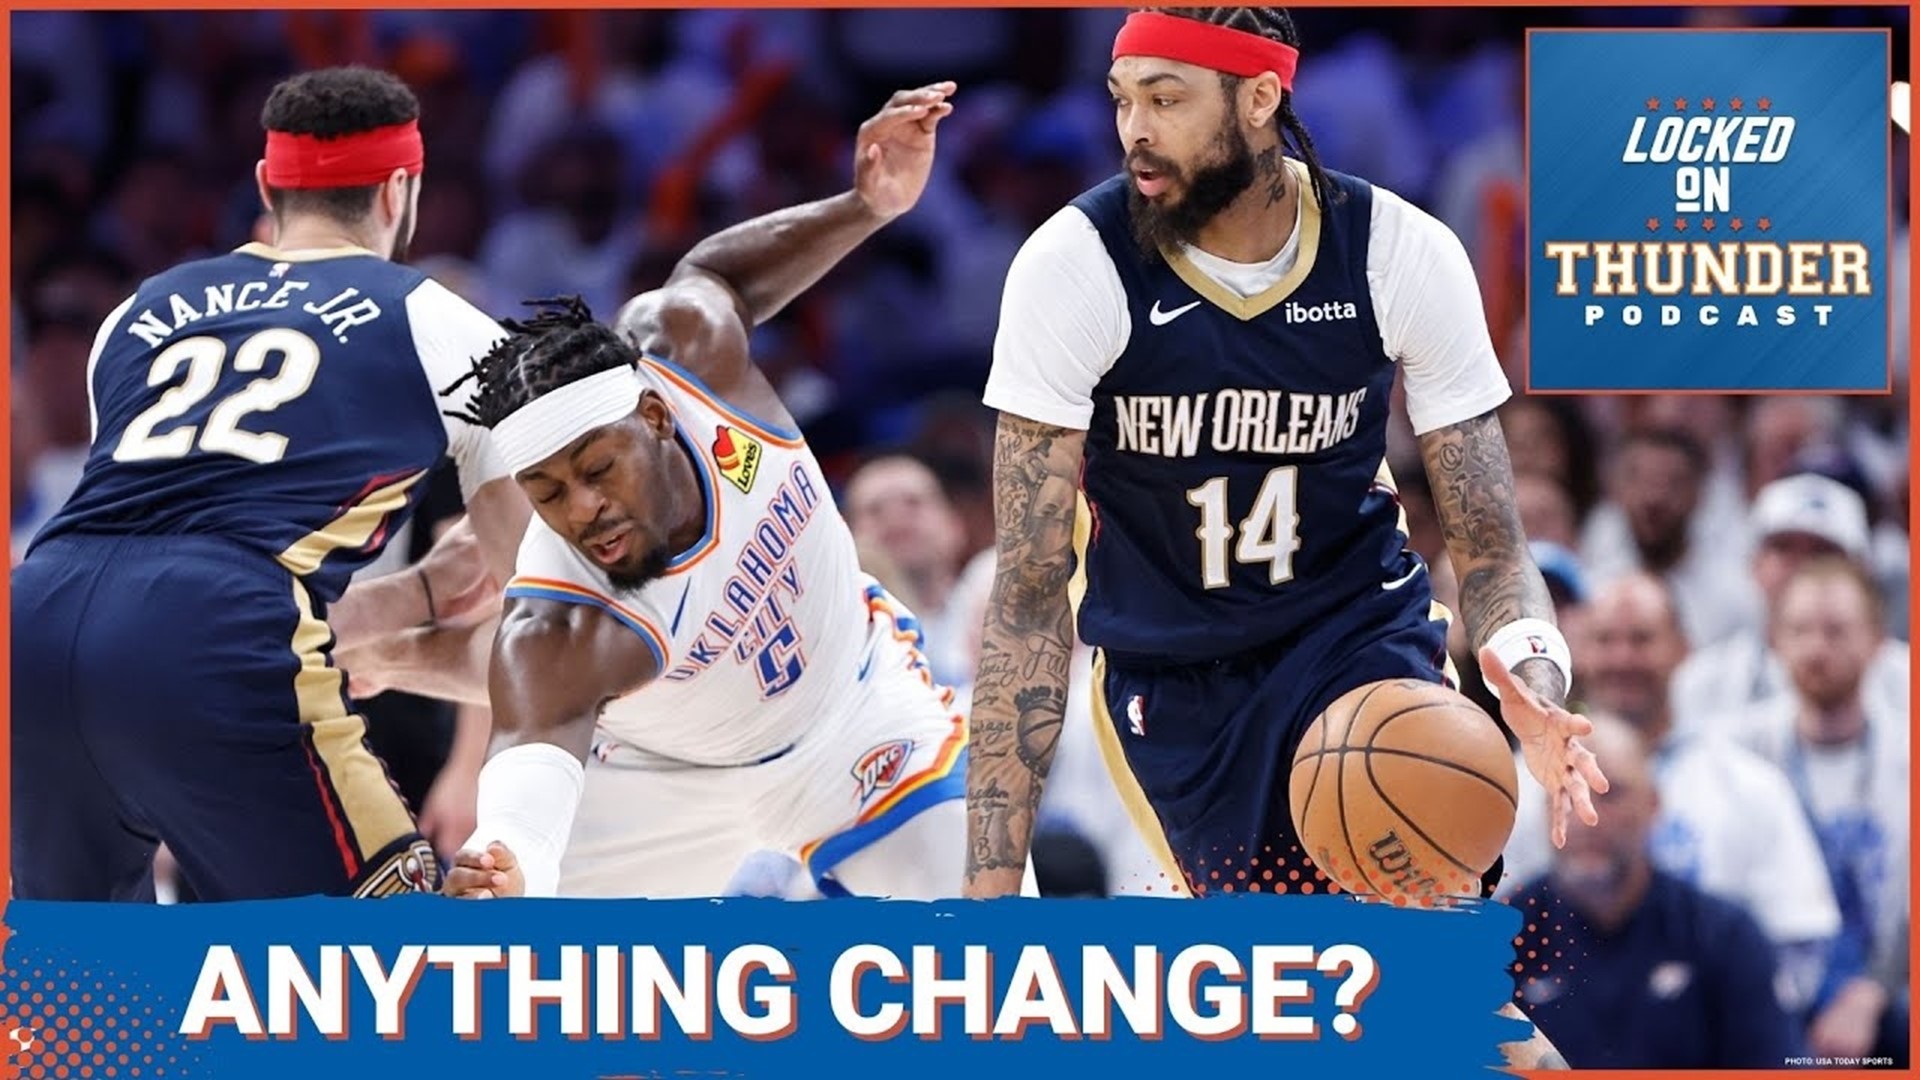 The Oklahoma City Thunder topped the New Orleans Pelicans in game one. What are the biggest adjustments the OKC Thunder have to make ahead of game two on Wednesday?